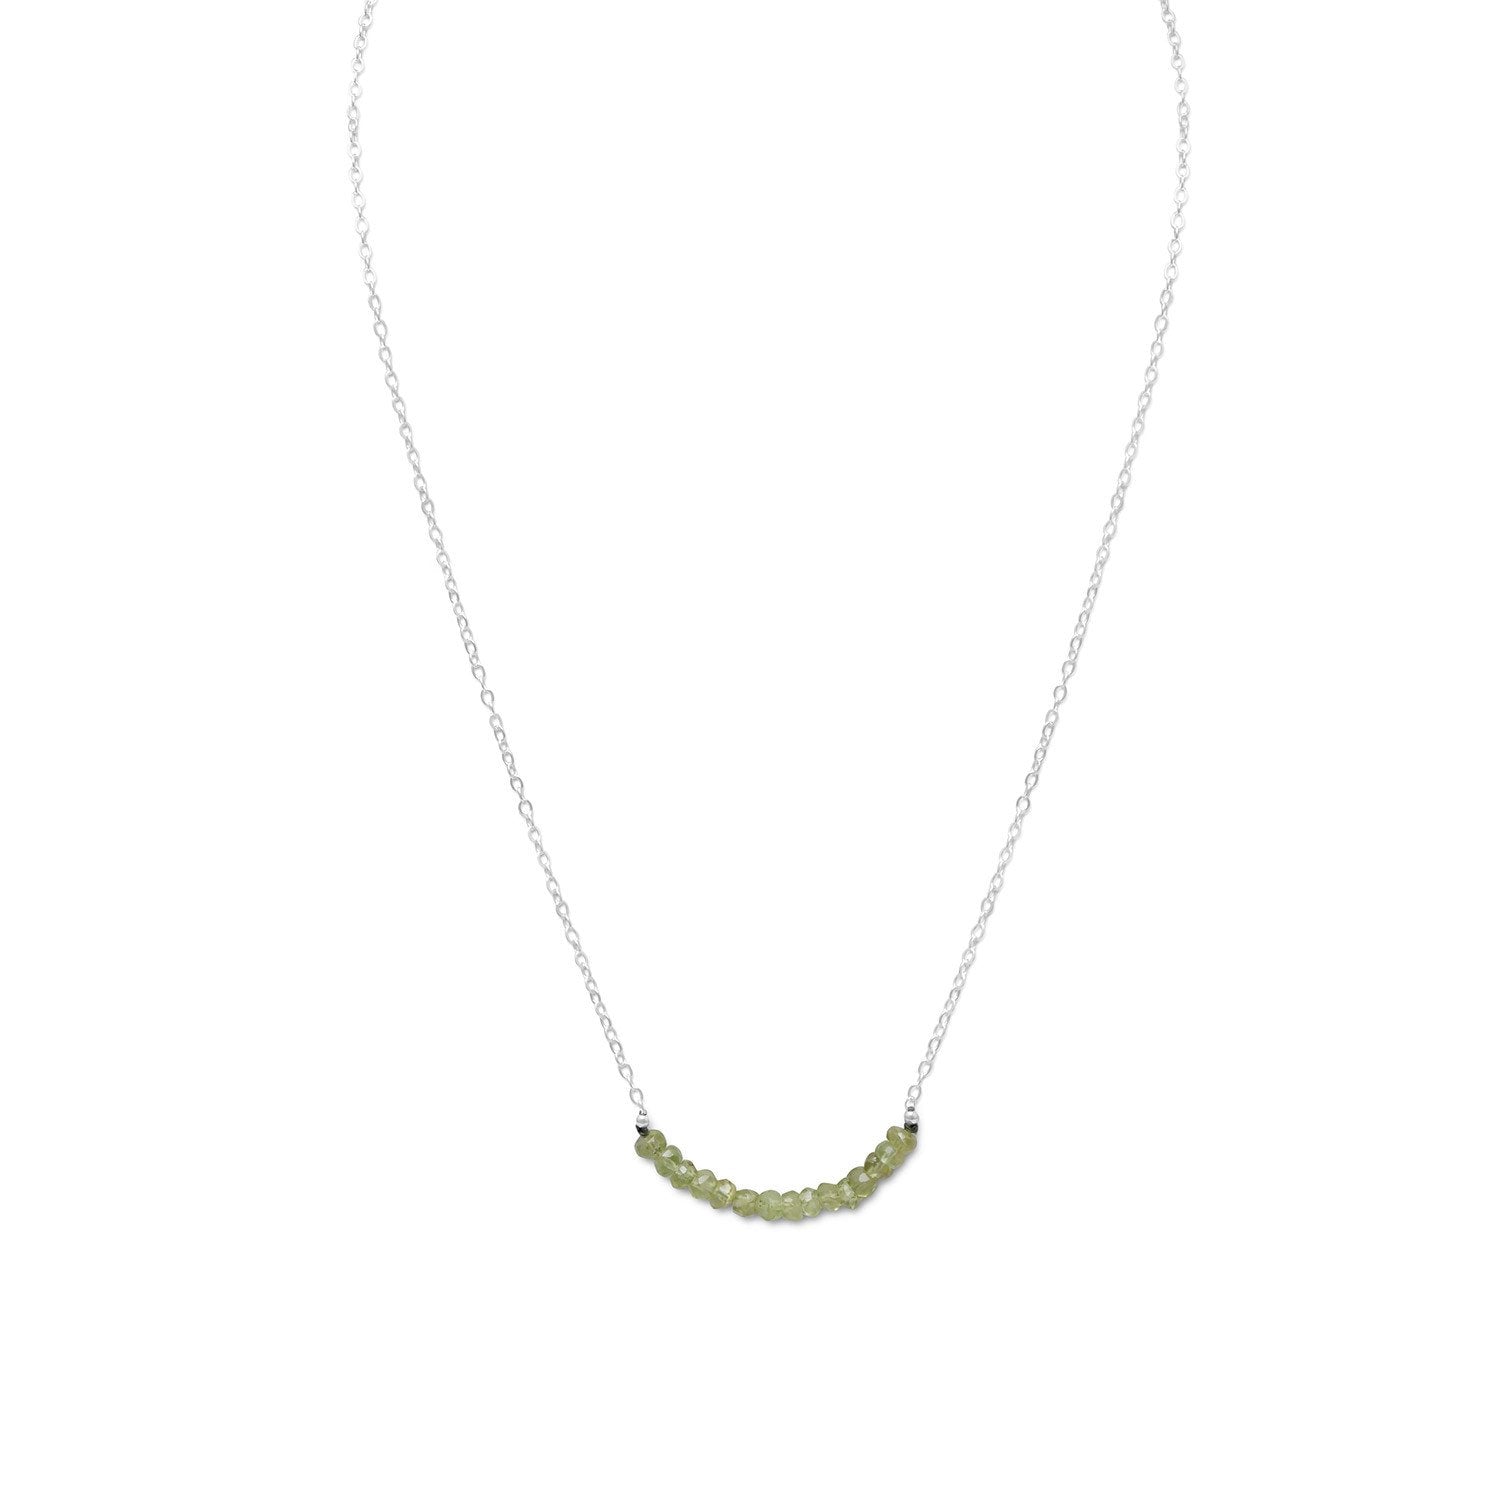 Faceted Peridot Bead Necklace - August Birthstone - Joyeria Lady